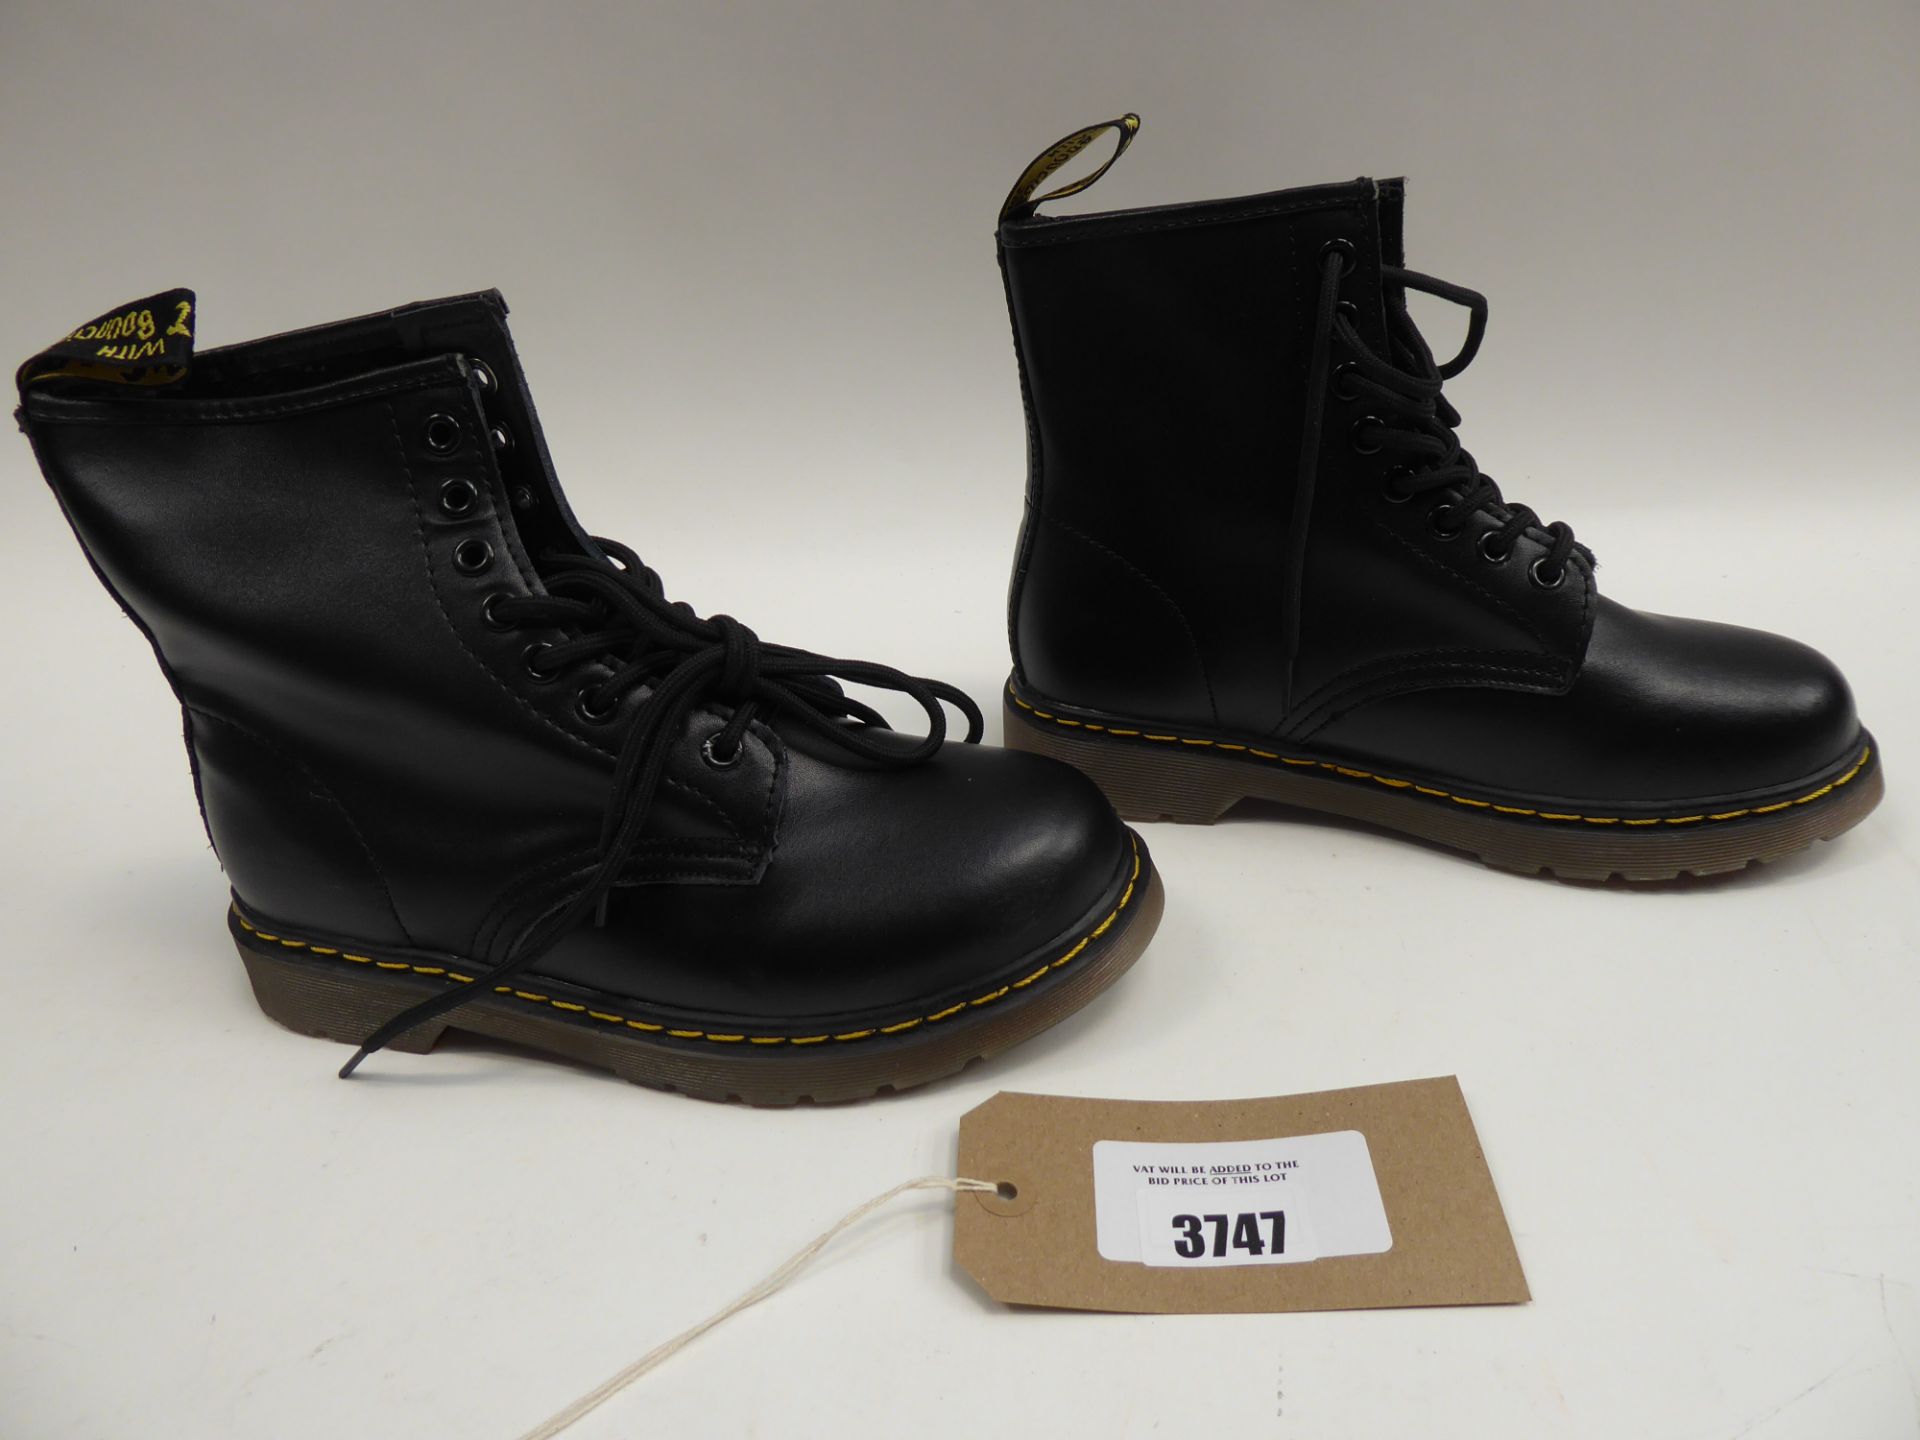 Dr Martens AirWair ankle boots size EU 39 - Image 2 of 2